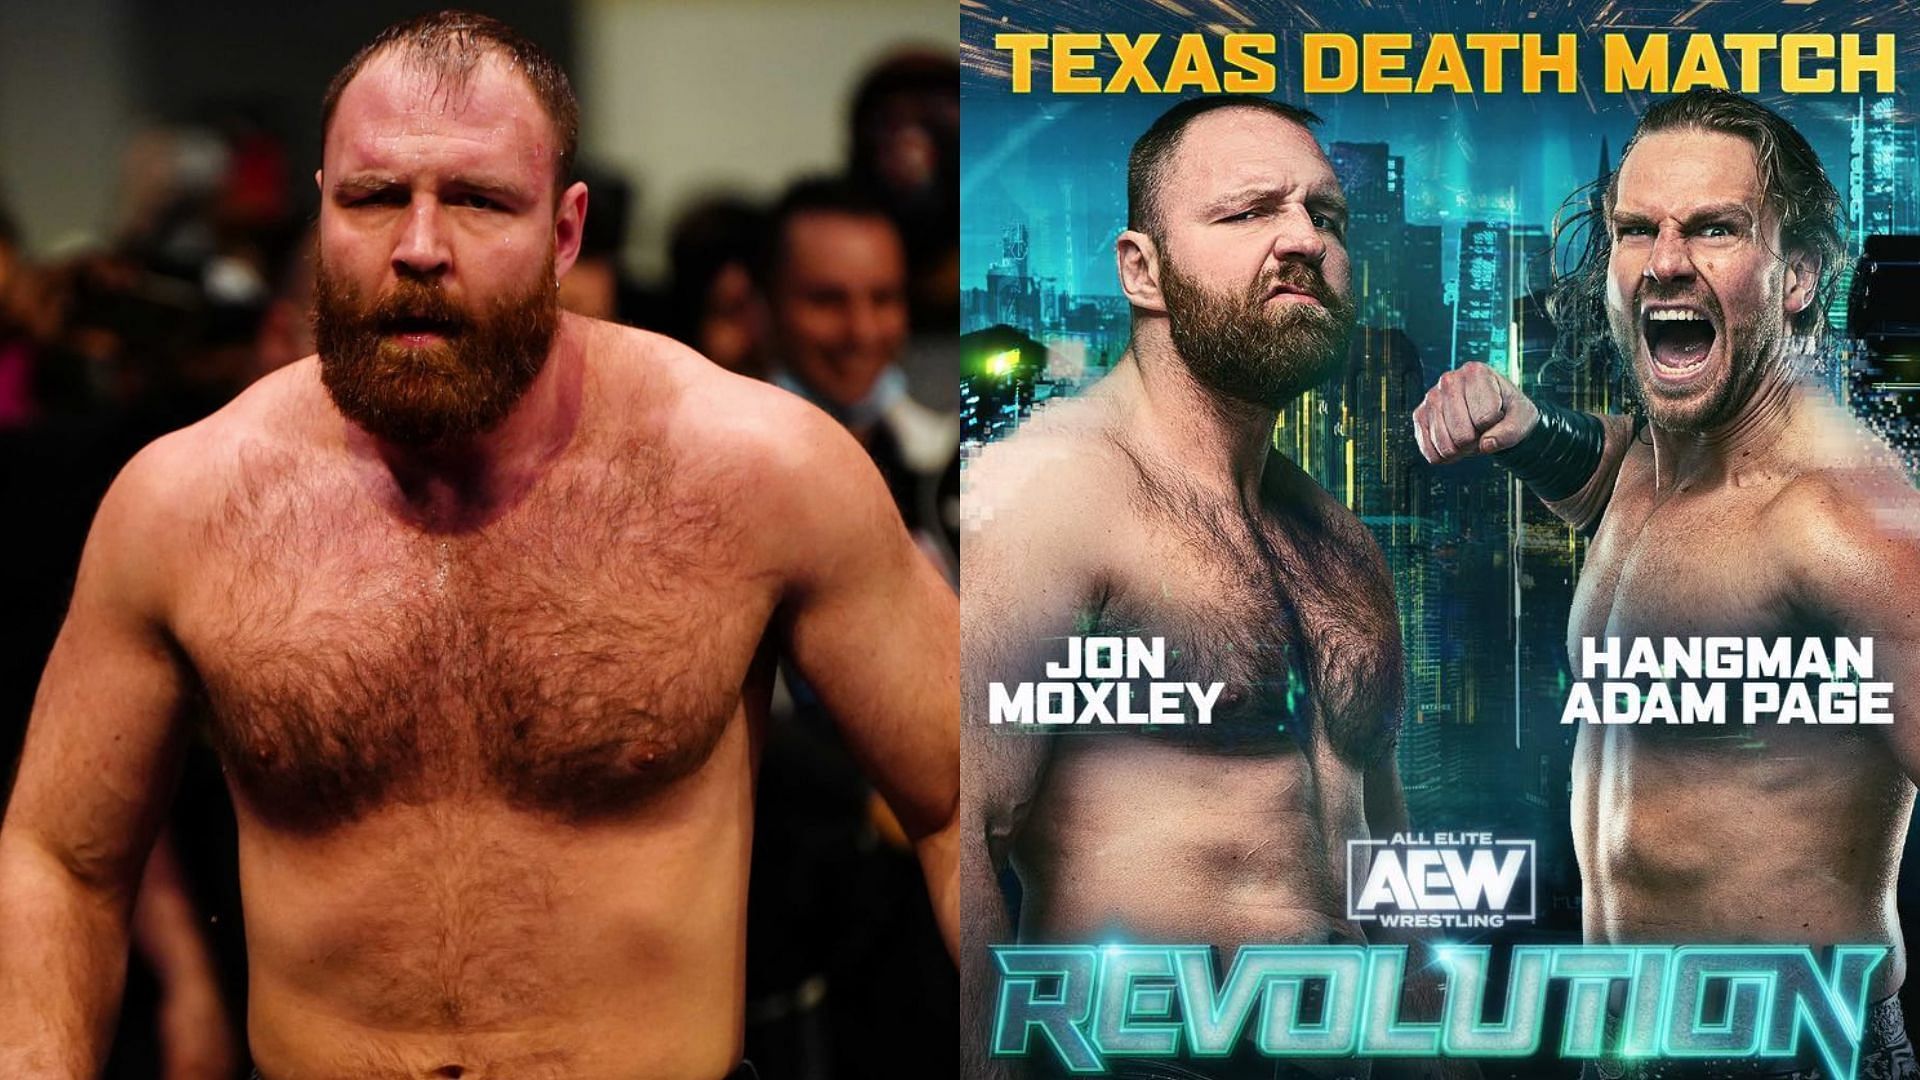 Jon Moxley will be in action against Hangman Adam Page tonight at AEW Revolution.